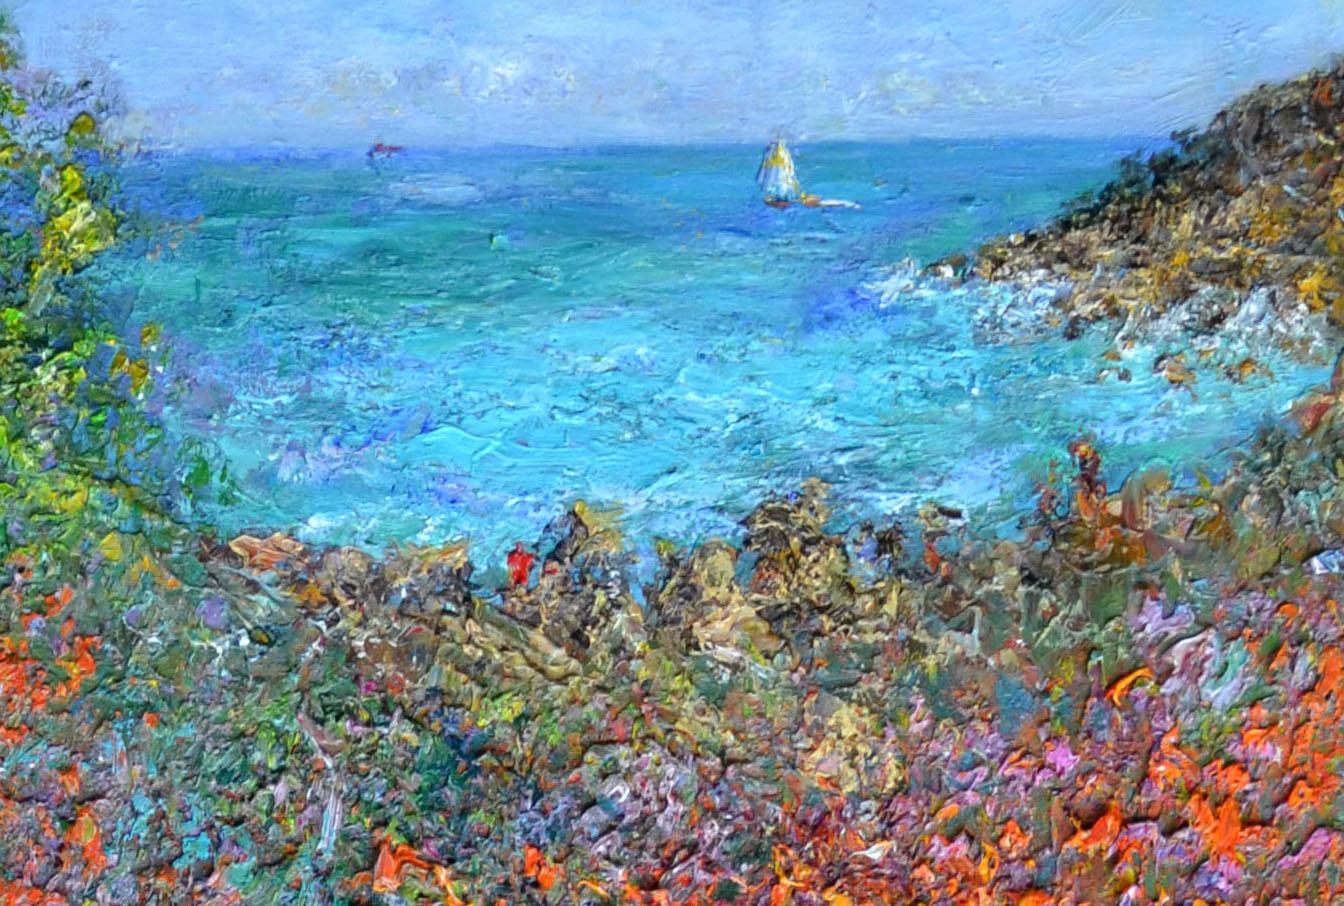 Porthgwarra is a very heavily impastoed work from this eminent English artist. Strang works passionately to represent his environment often painting en plein air to capture the image he wishes to portray.

Michael is an artist best described as